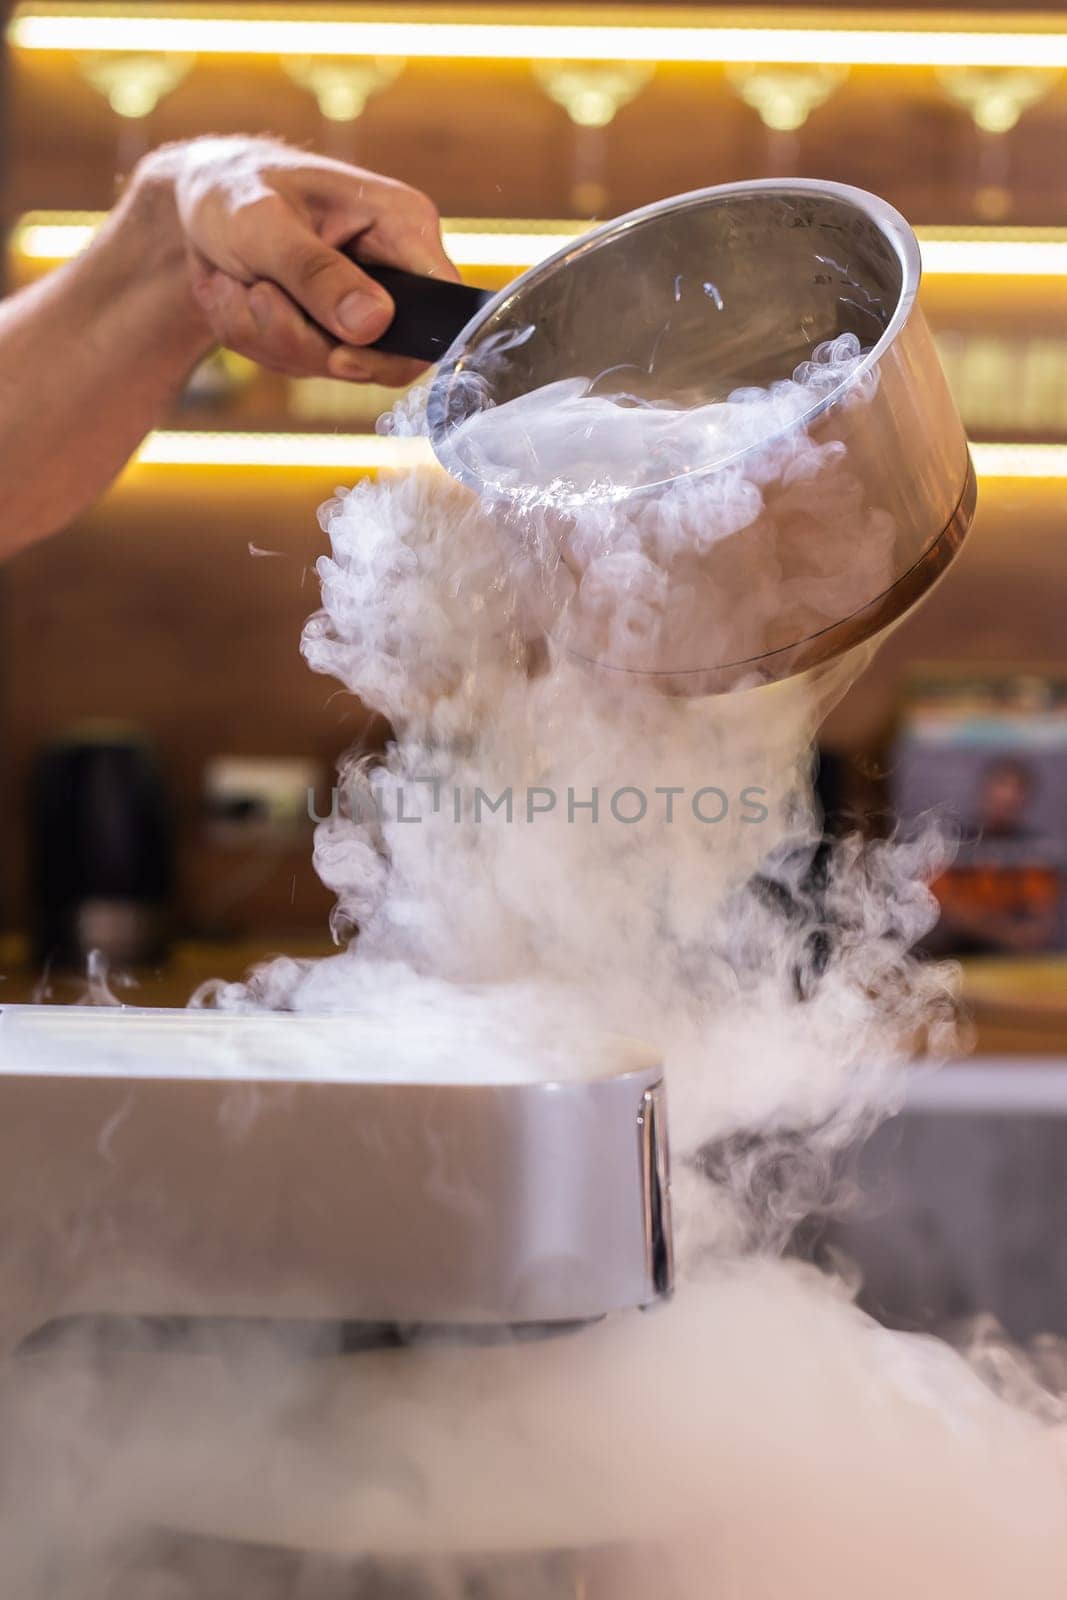 Smoke vapor dry ice in bowl in kitchen by Satura86